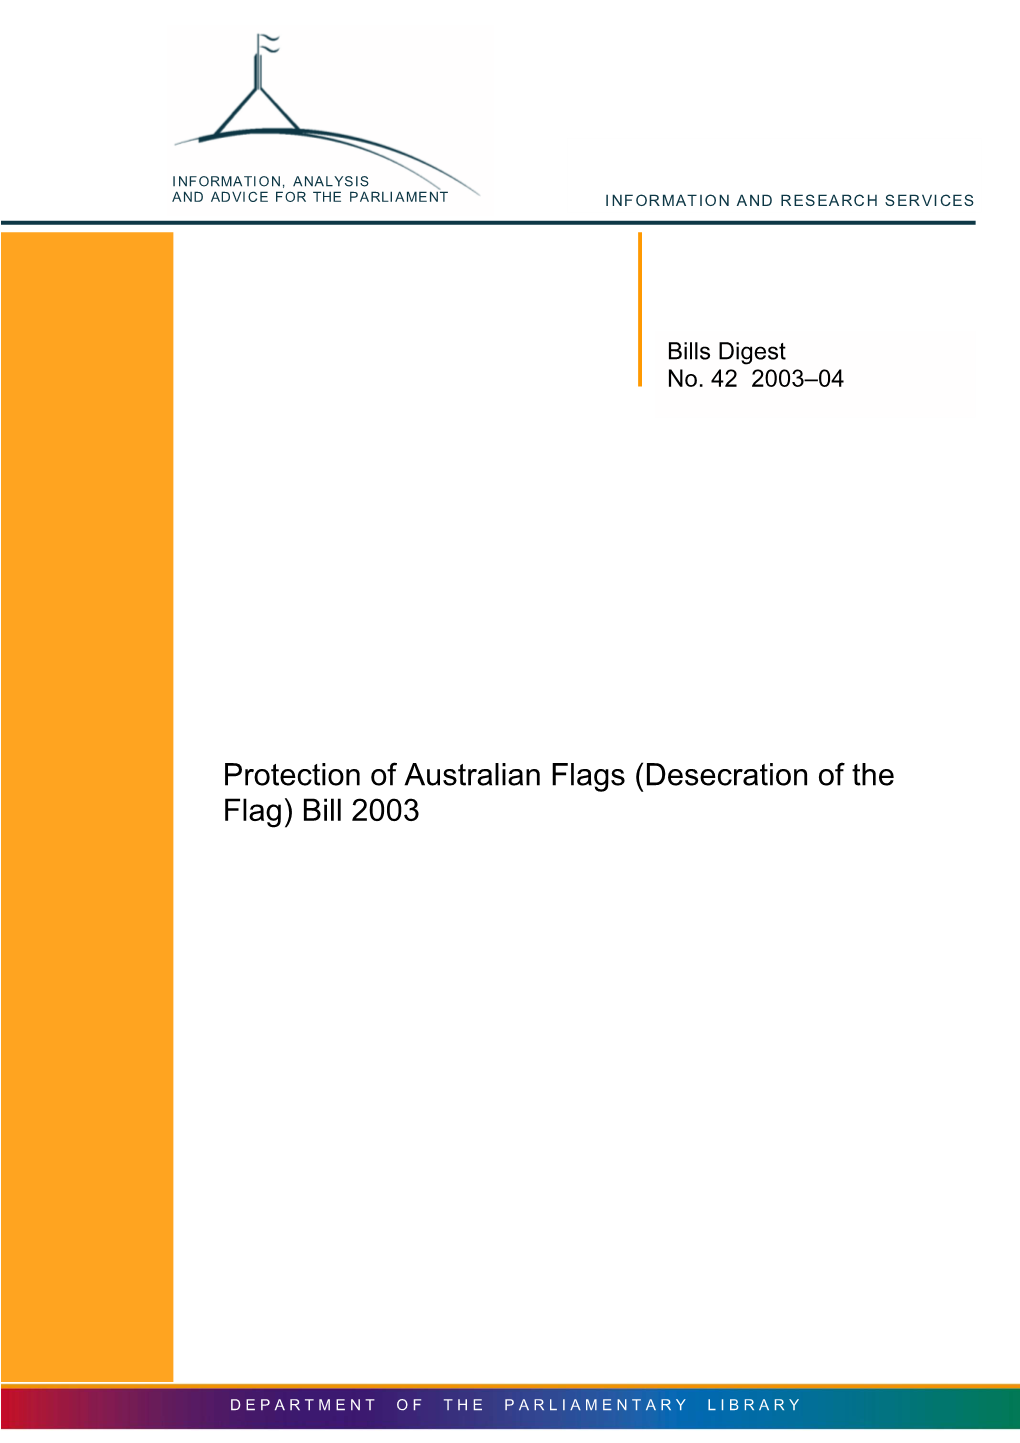 Protection of Australian Flags (Desecration of the Flag) Bill 2003